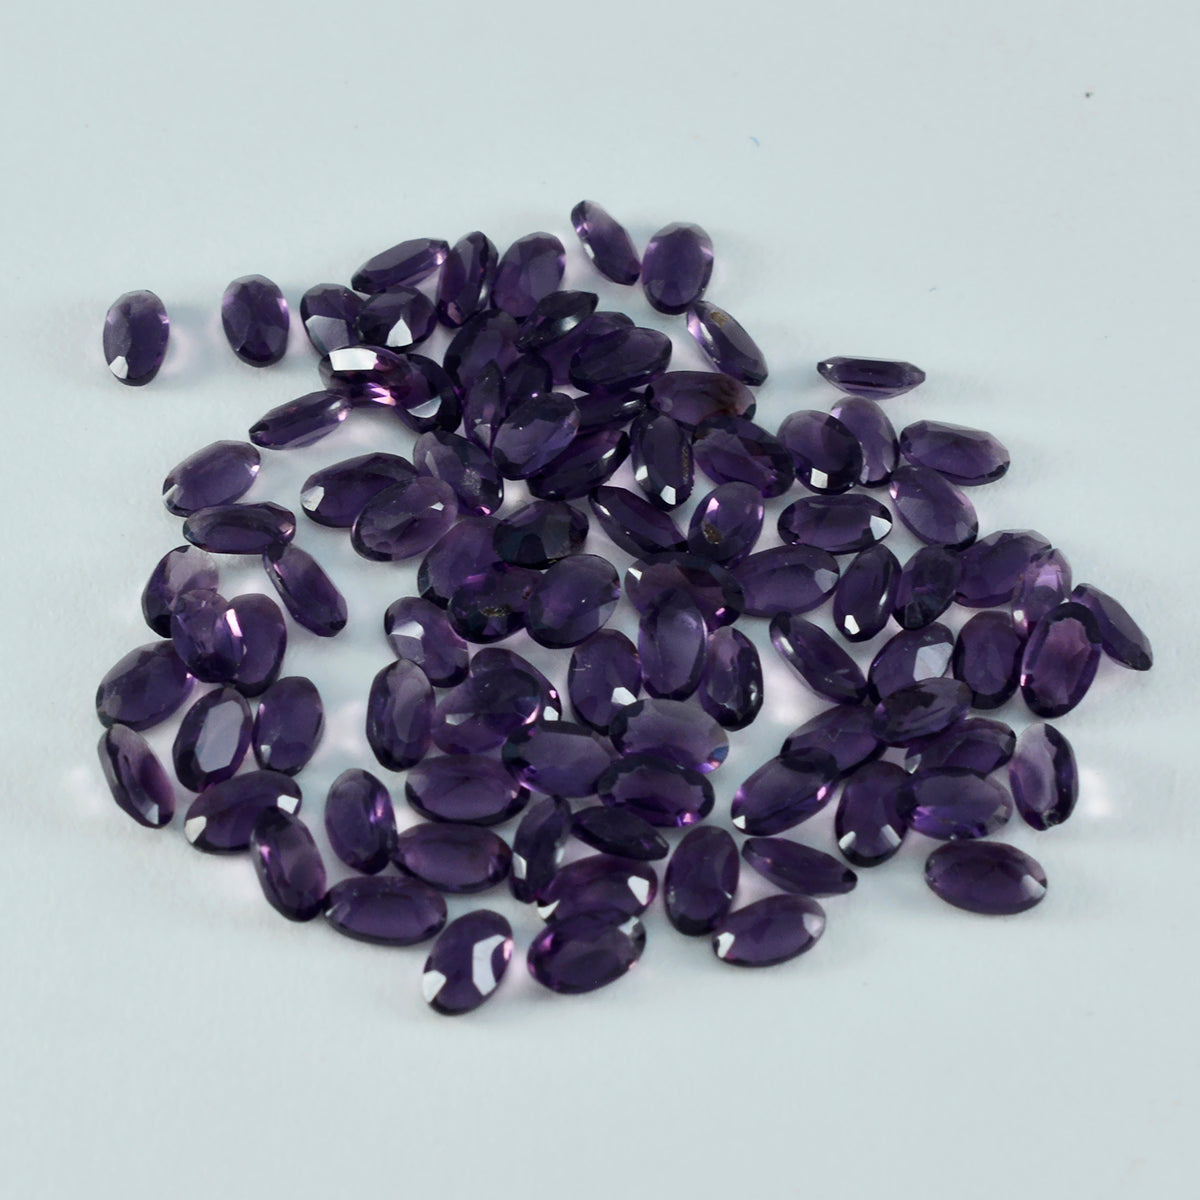 Riyogems 1PC Purple Amethyst CZ Faceted 3x5 mm Oval Shape lovely Quality Loose Stone